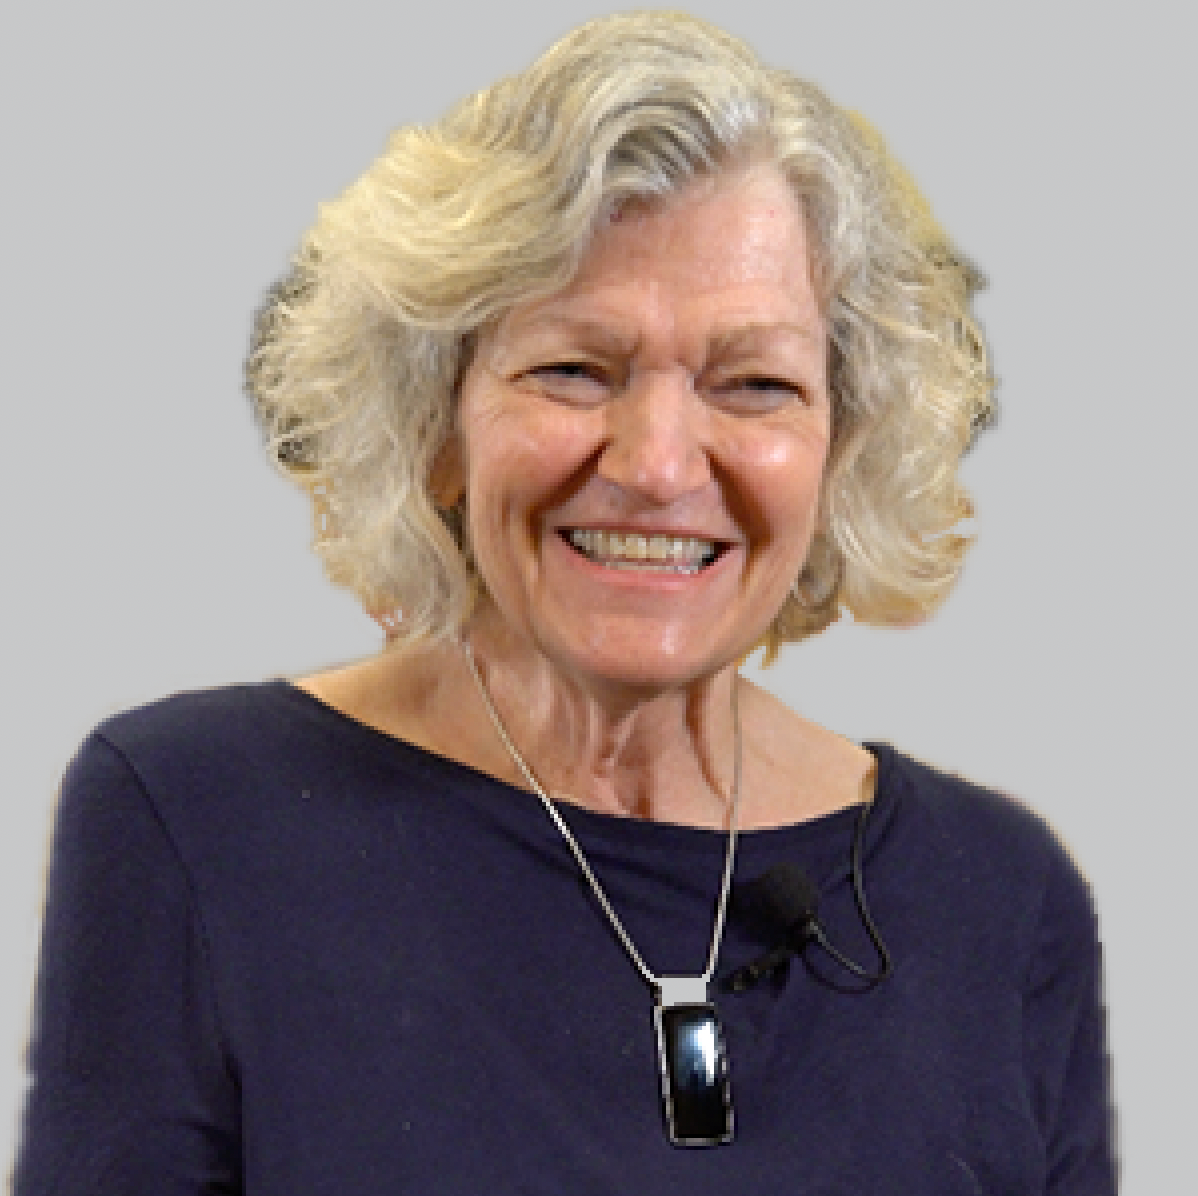 Jean Hubble, MD, semi-retired neurologist and consultant, PMD Alliance